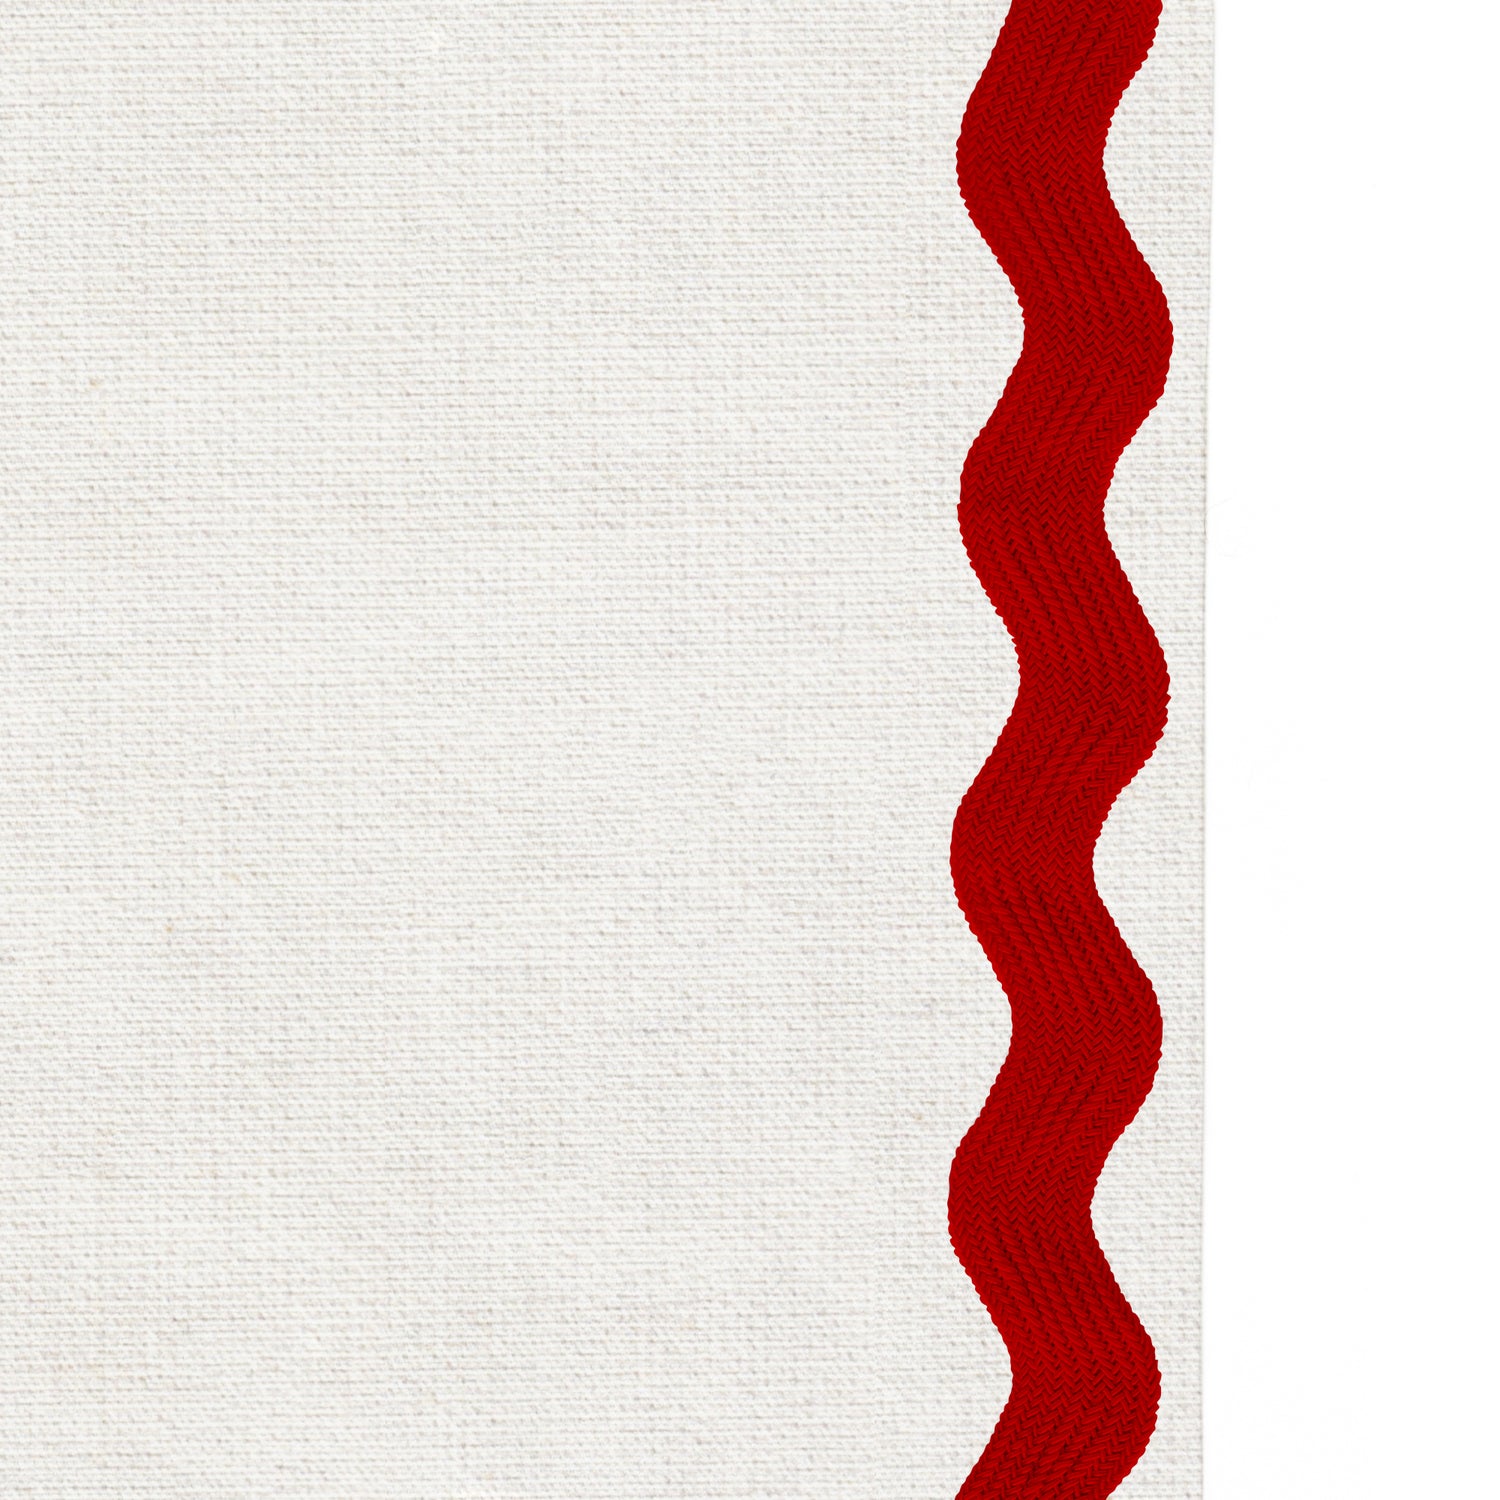 Upclose picture of Flour custom Natural Whiteshower curtain with cherry rick rack trim